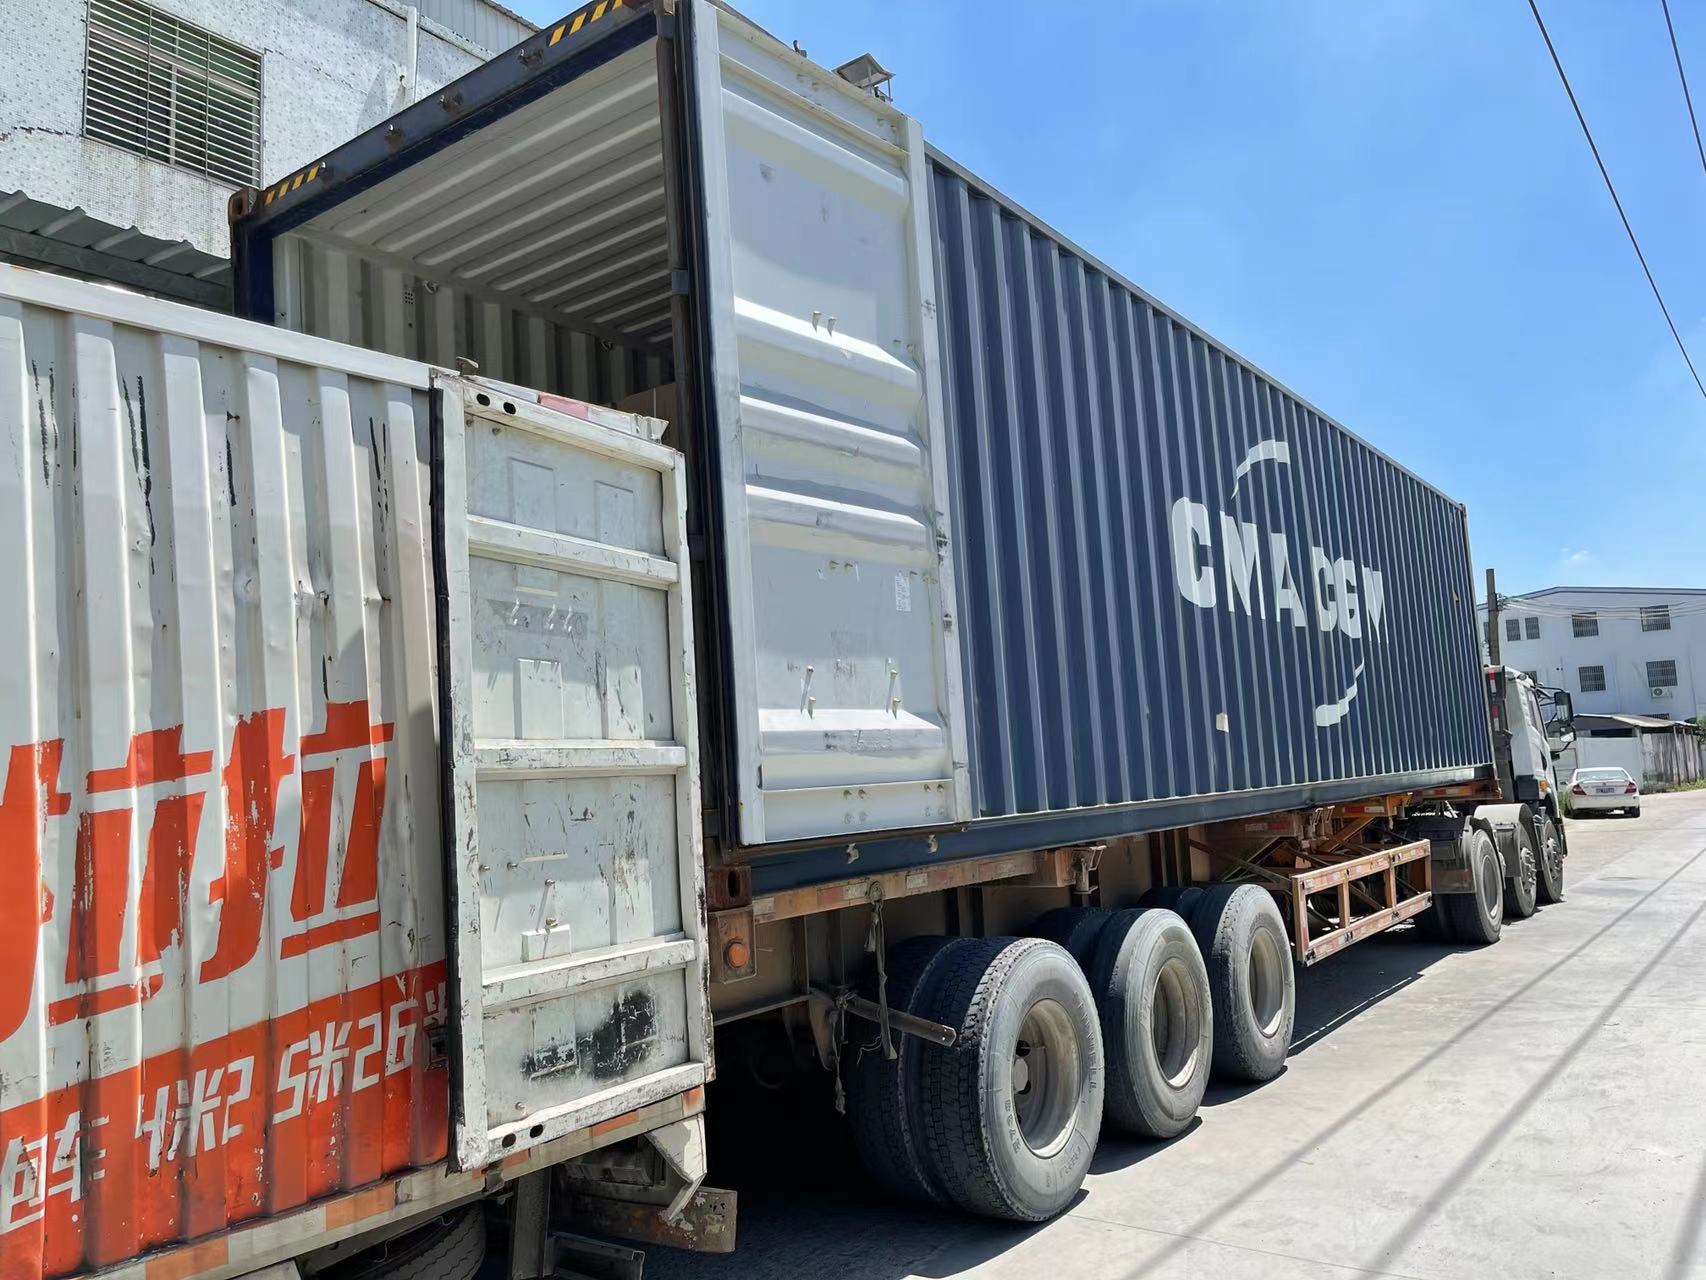 Yidaxing Light Industry Prioritizes Workers’ Health with Evening Container Loading